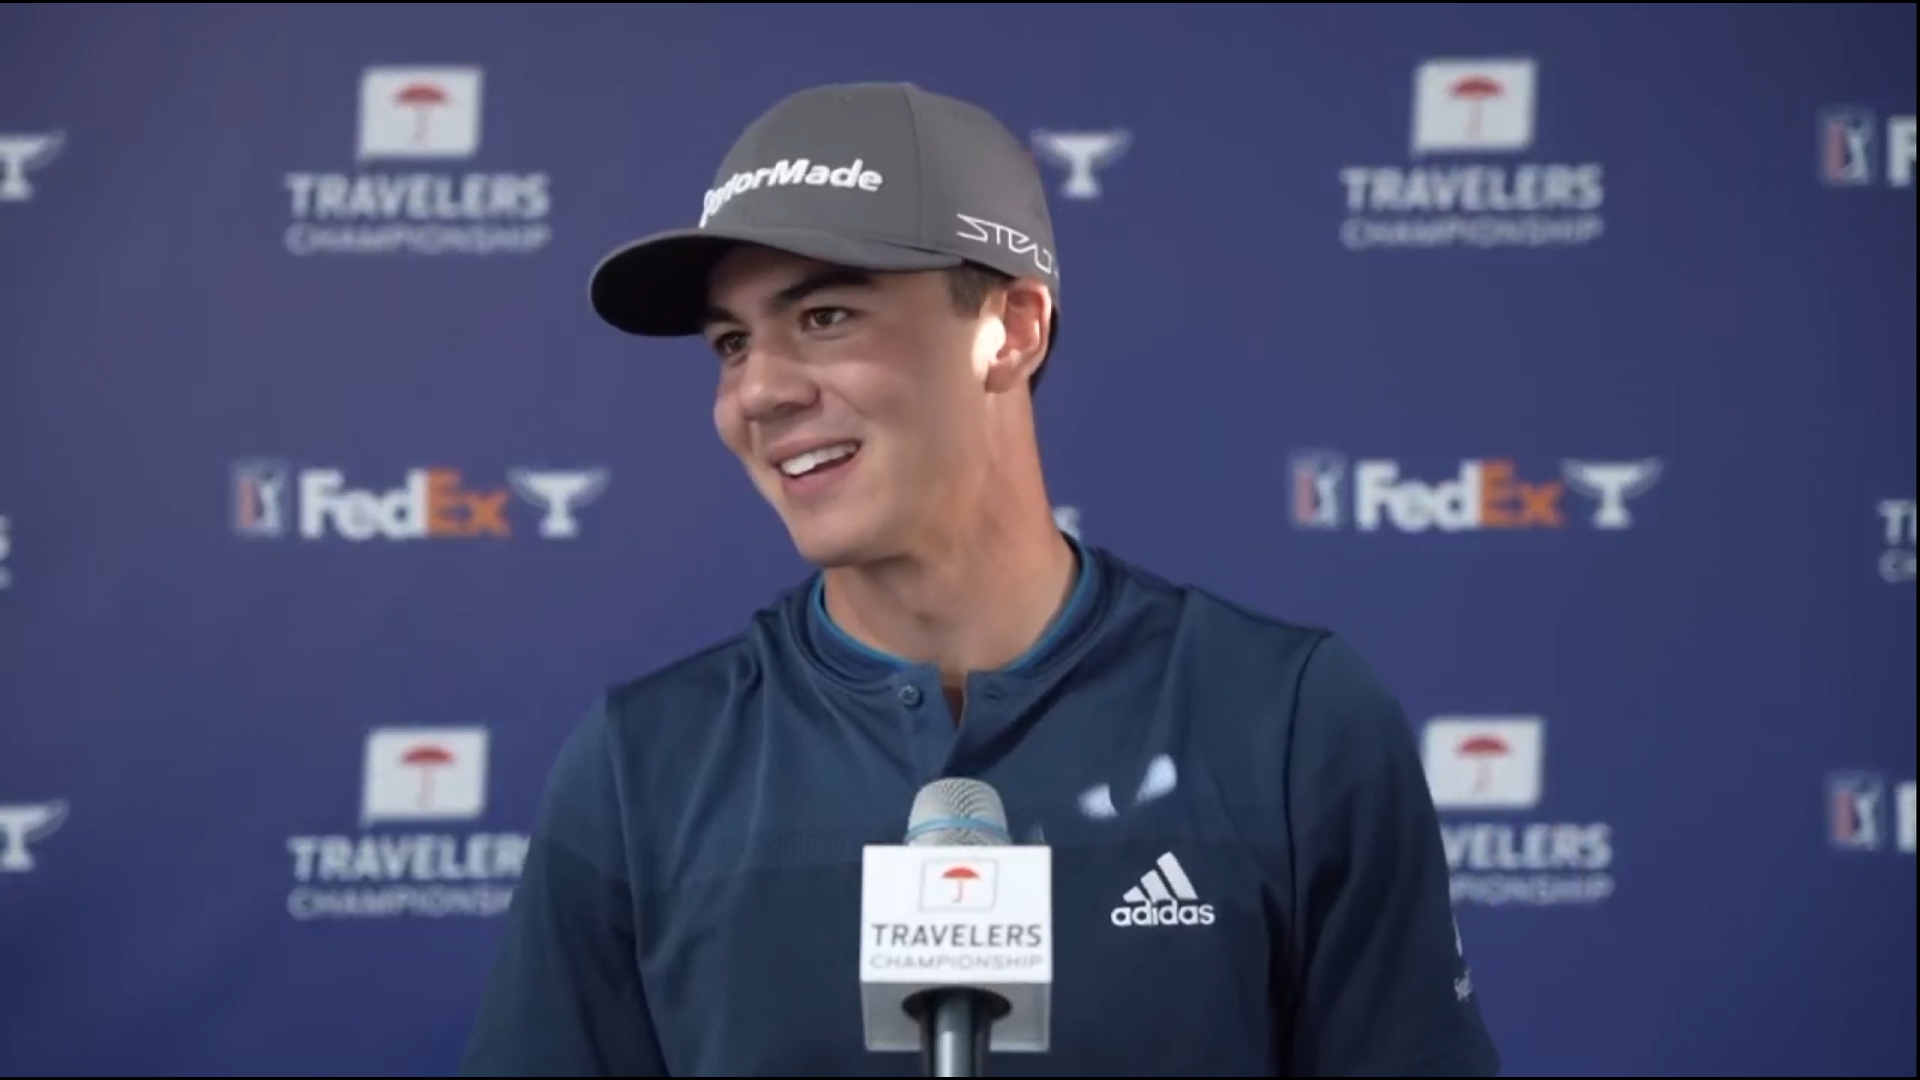 Thorbjornsen, who is only 20 years old, shot -15 for the Travelers tournament. He said he still intends to return to college at Stanford in the fall.